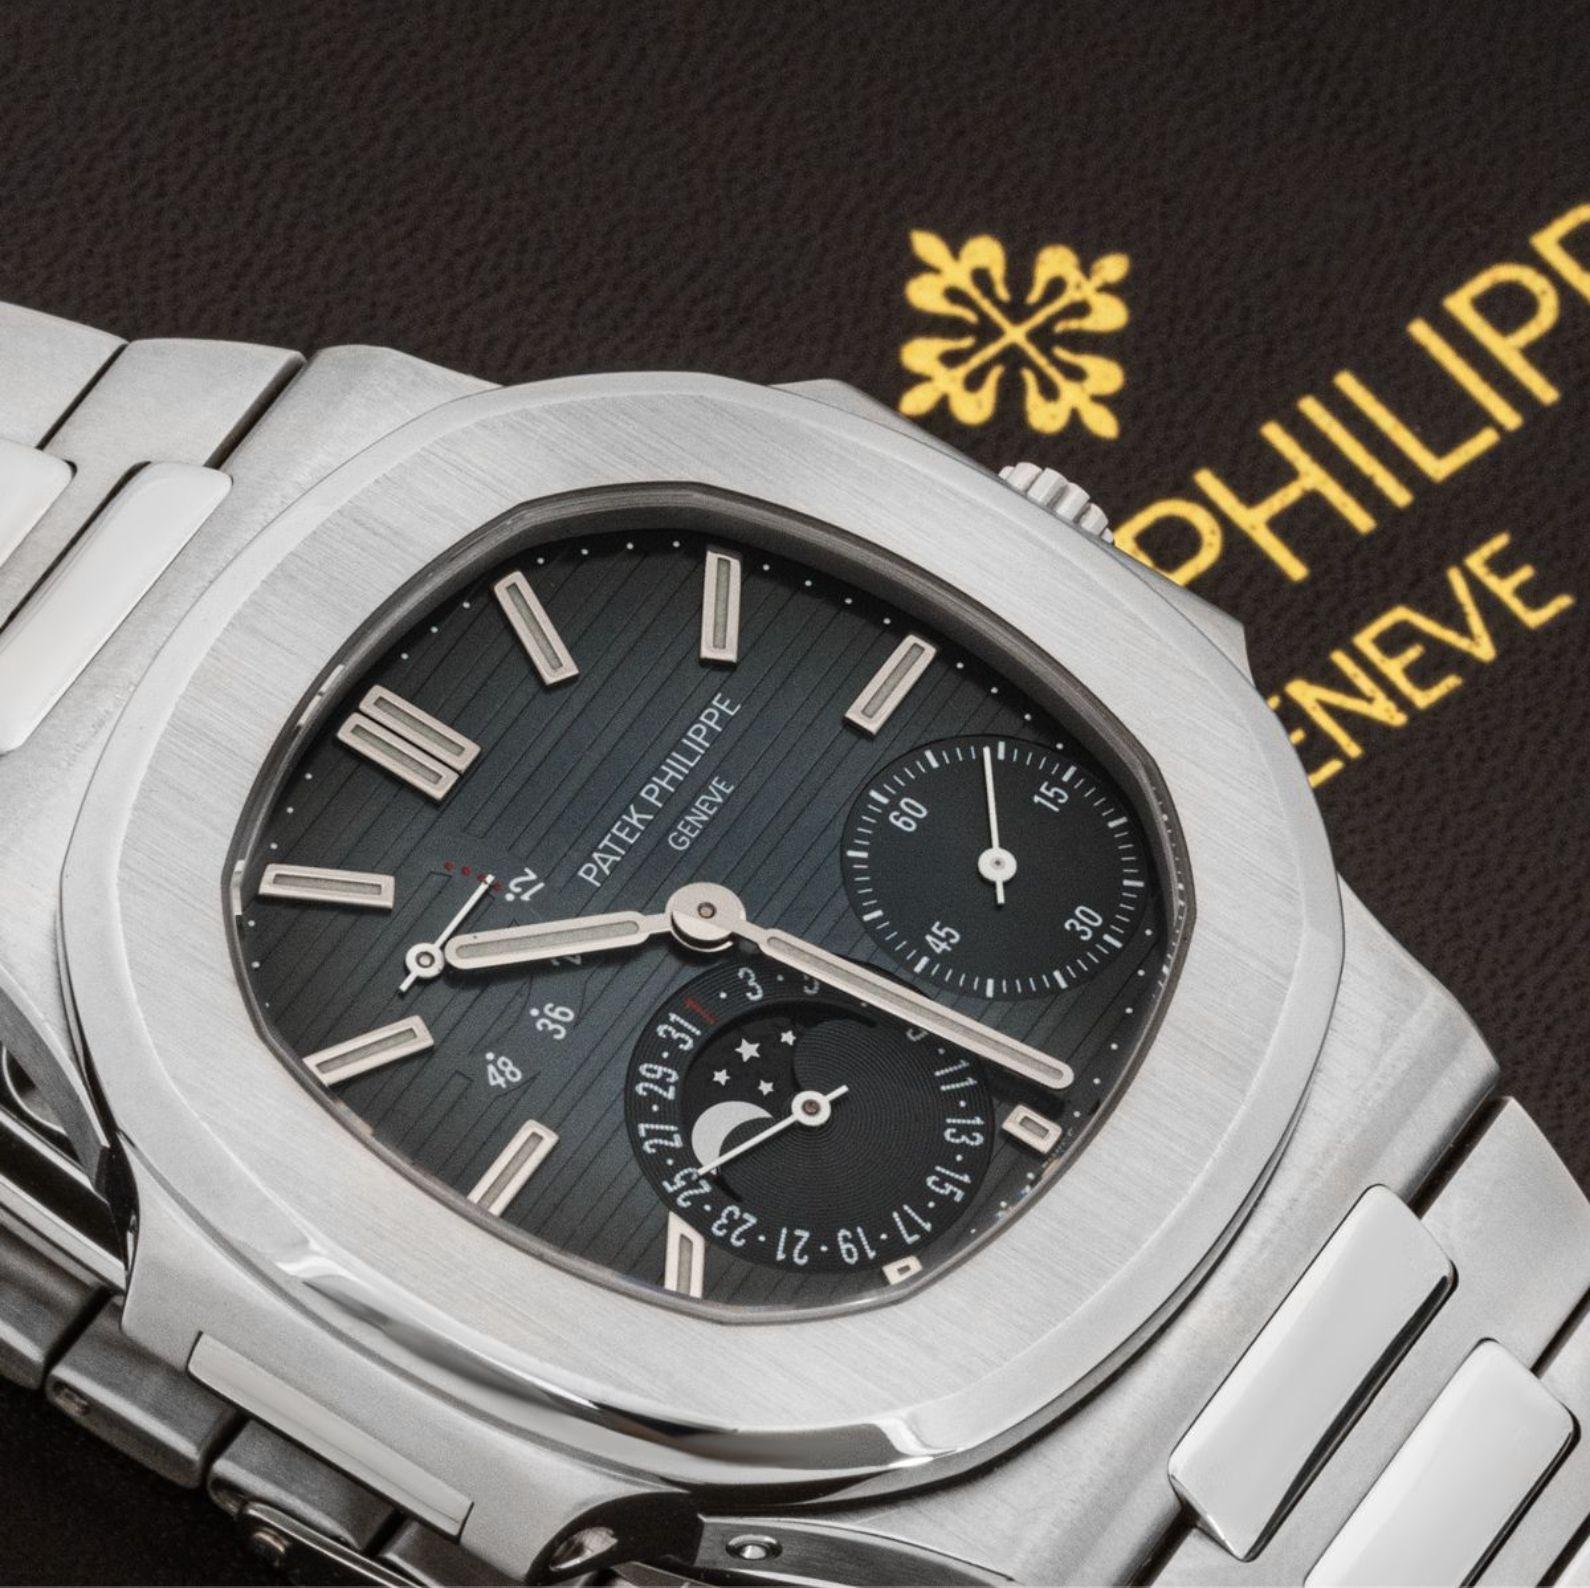 A Very Rare Stainless Steel Nautilus Wristwatch by Patek Philippe. Featuring a black-grey dial with applied hour markers, small seconds, date and moon phase display as well as a power reserve indicator.

Fitted with a sapphire glass, an exhibition